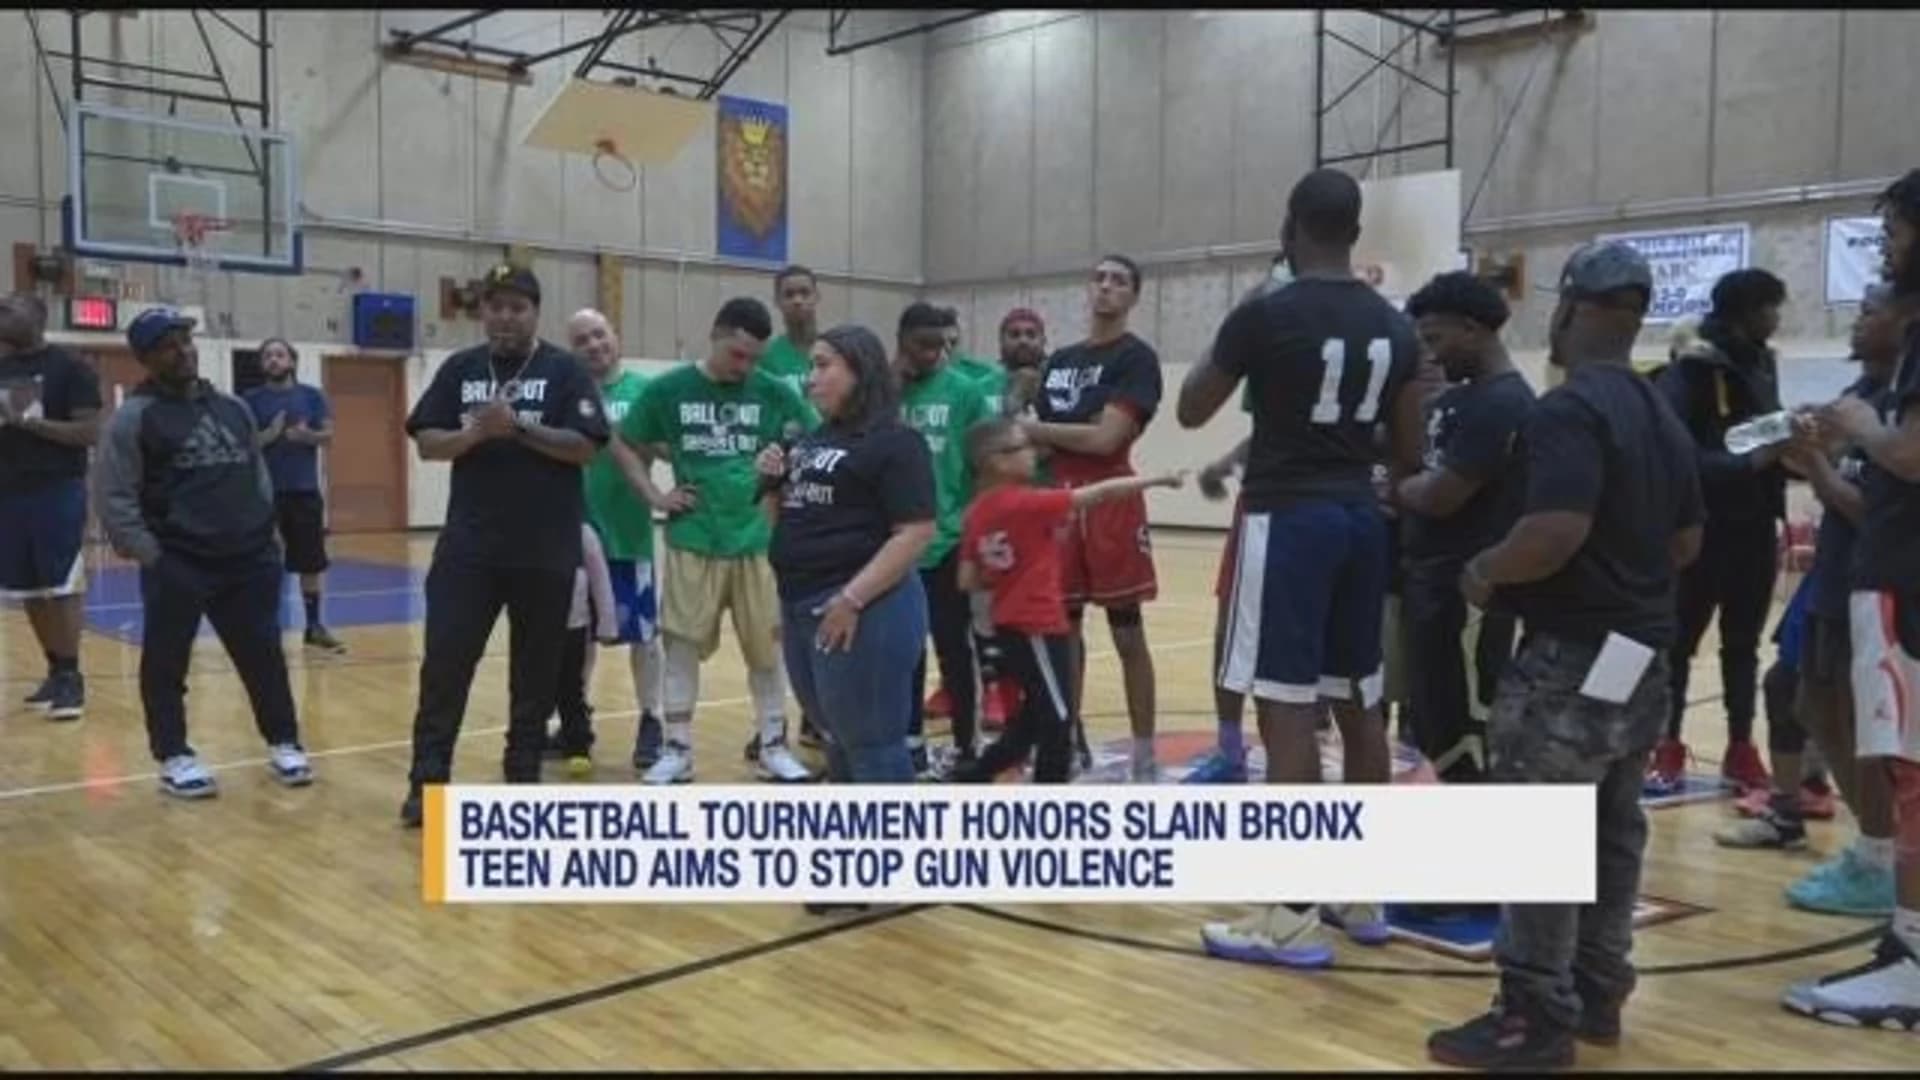 Community comes together at hoops tournament in honor of slain teen